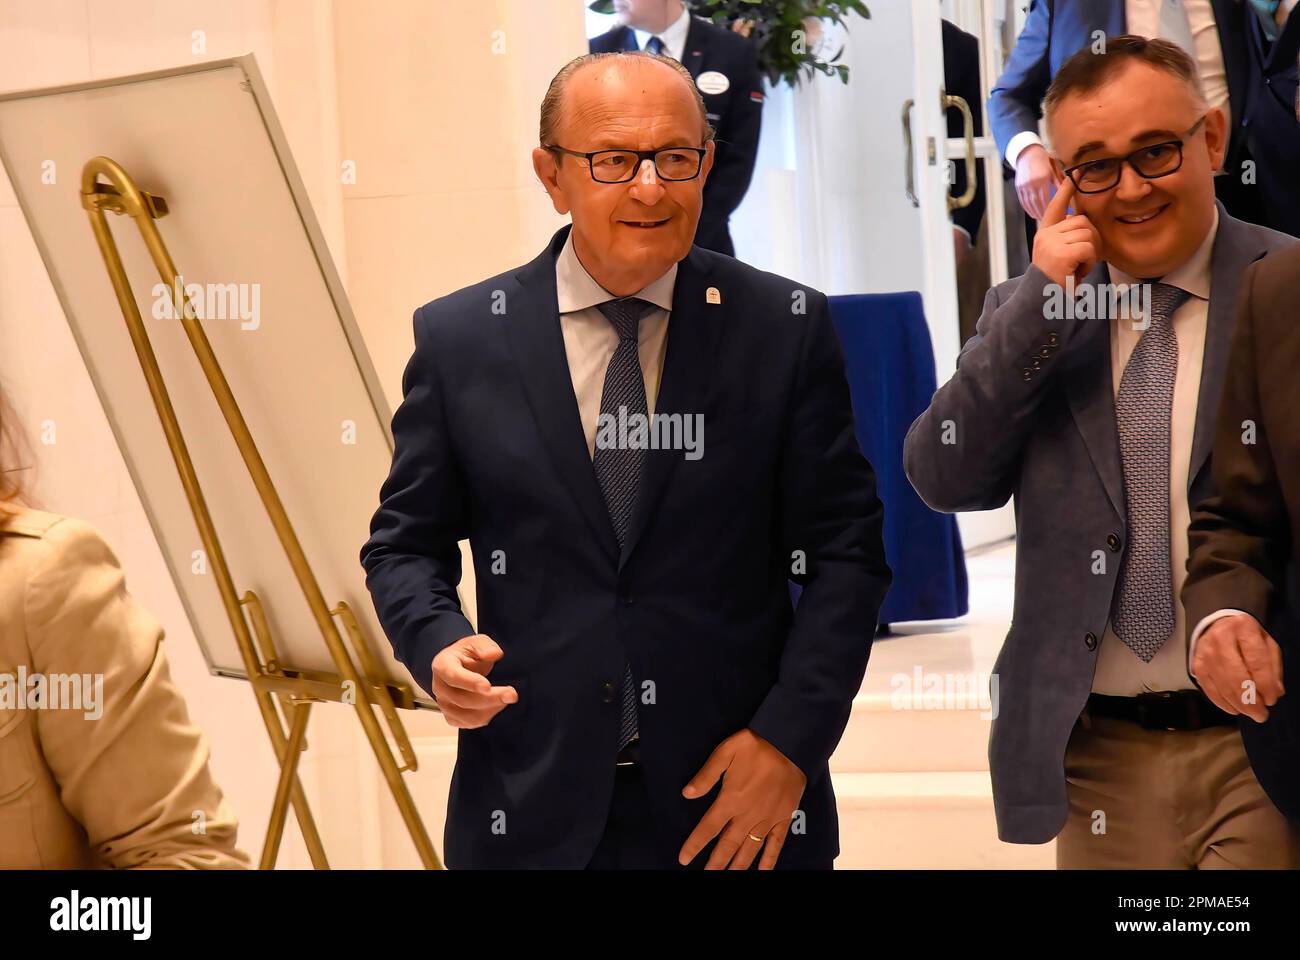 Madrid, Spain. 12th Apr, 2023. The Minister of tourism of the Government of Cantabria, Francisco Javier López Marcano, seen arriving at the Ritz Hotel during the presentation. The president of Cantabria, together with colleagues from the Cantabrian Regionalist Party, presented his candidacy for re-election in Madrid. (Photo by Richard Zubelzu/SOPA Images/Sipa USA) Credit: Sipa USA/Alamy Live News Stock Photo